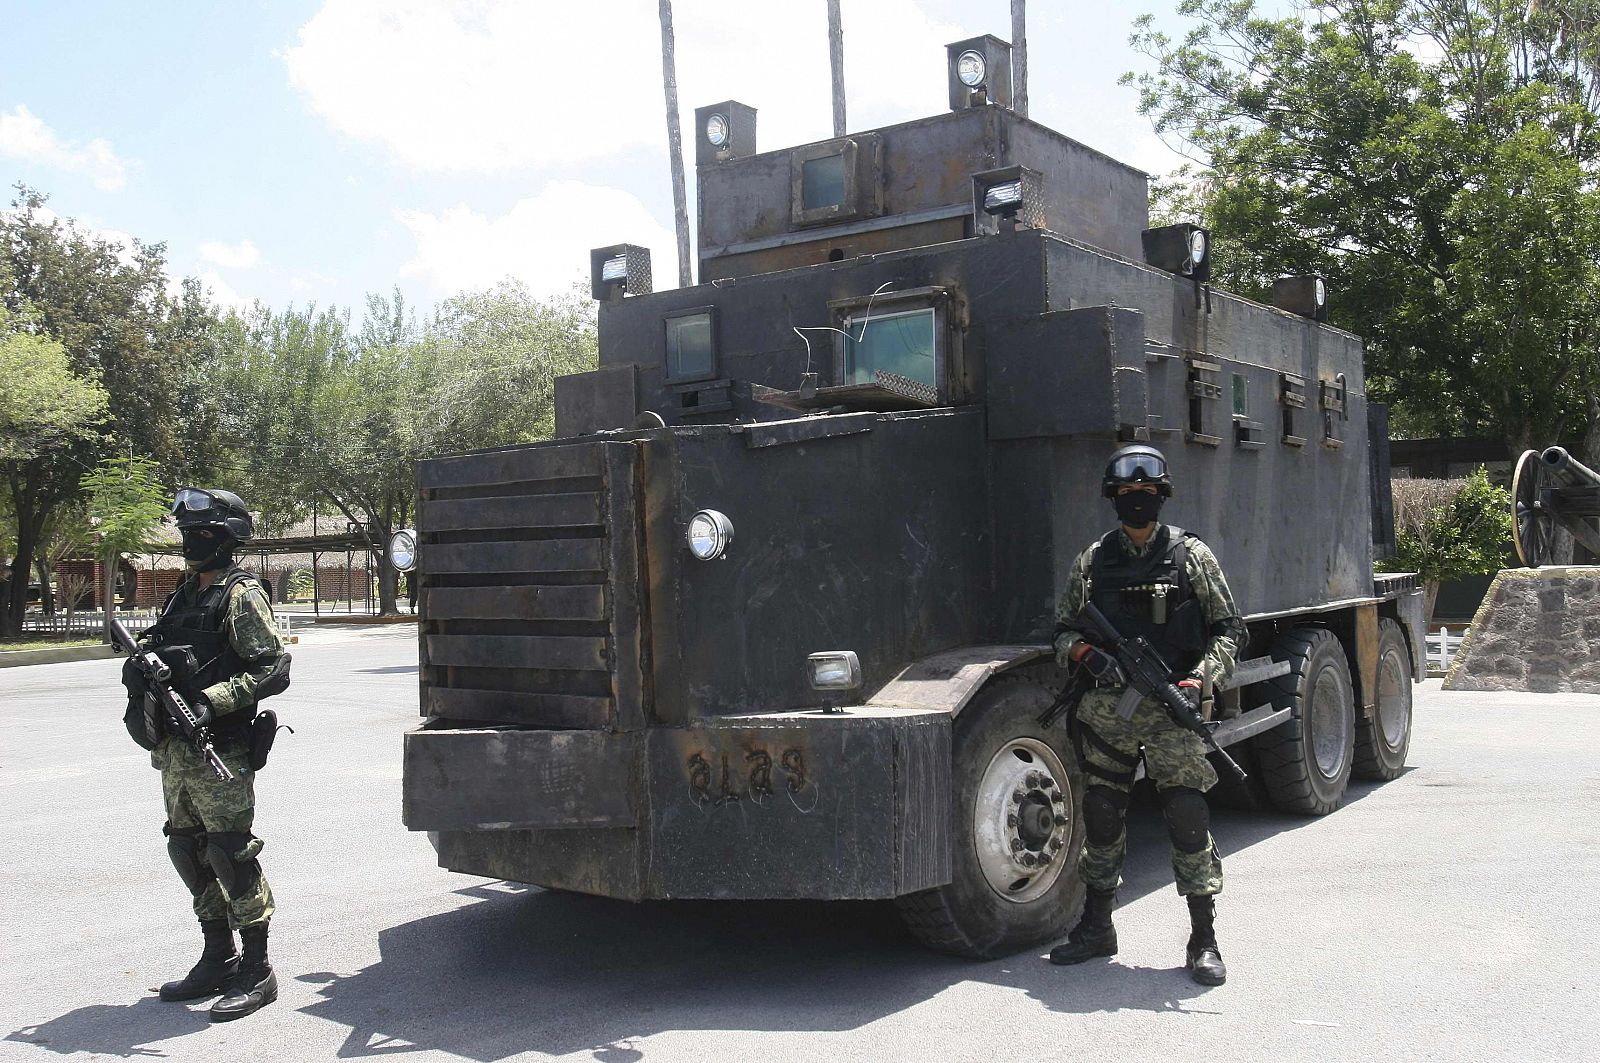 Soldiers stand guard in front of a modified and armored truck as it is displayed to the media at a military base in Reynosa